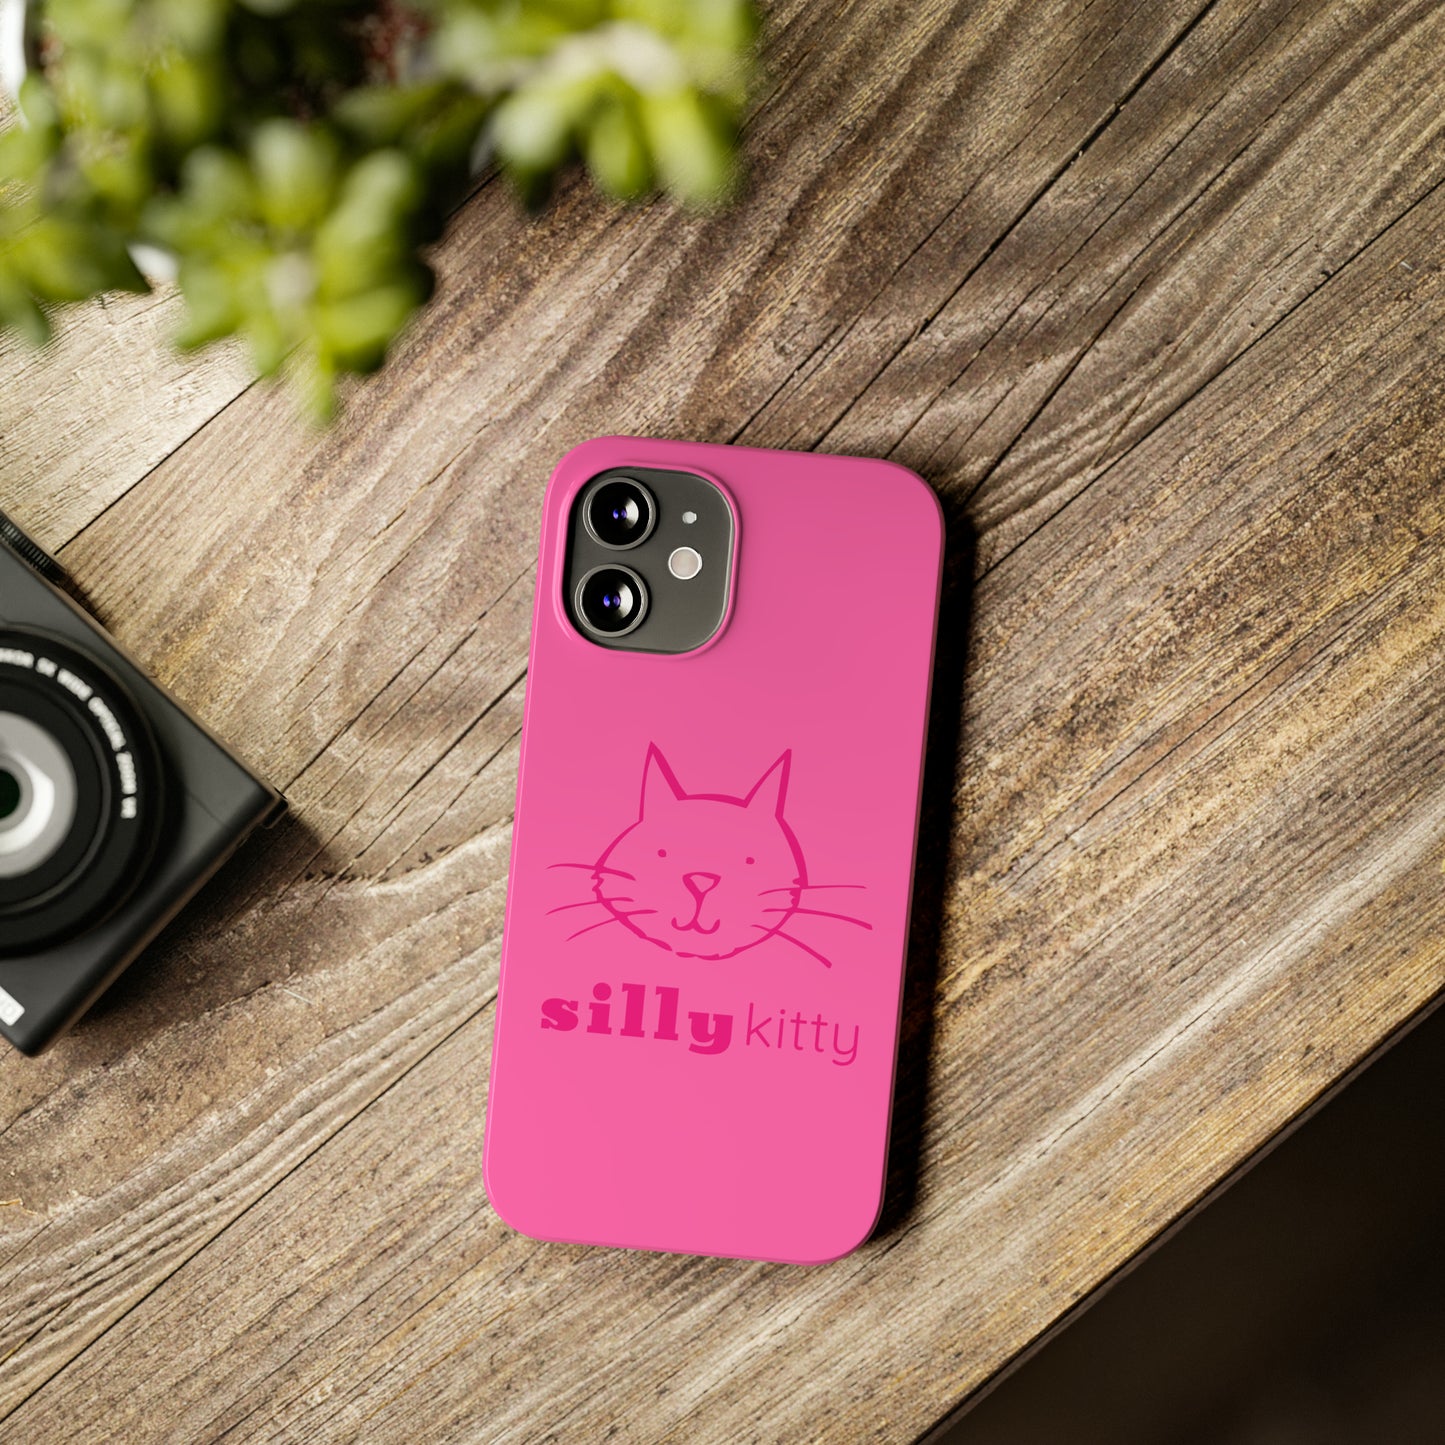 Silly Kitty Slim Phone Cases